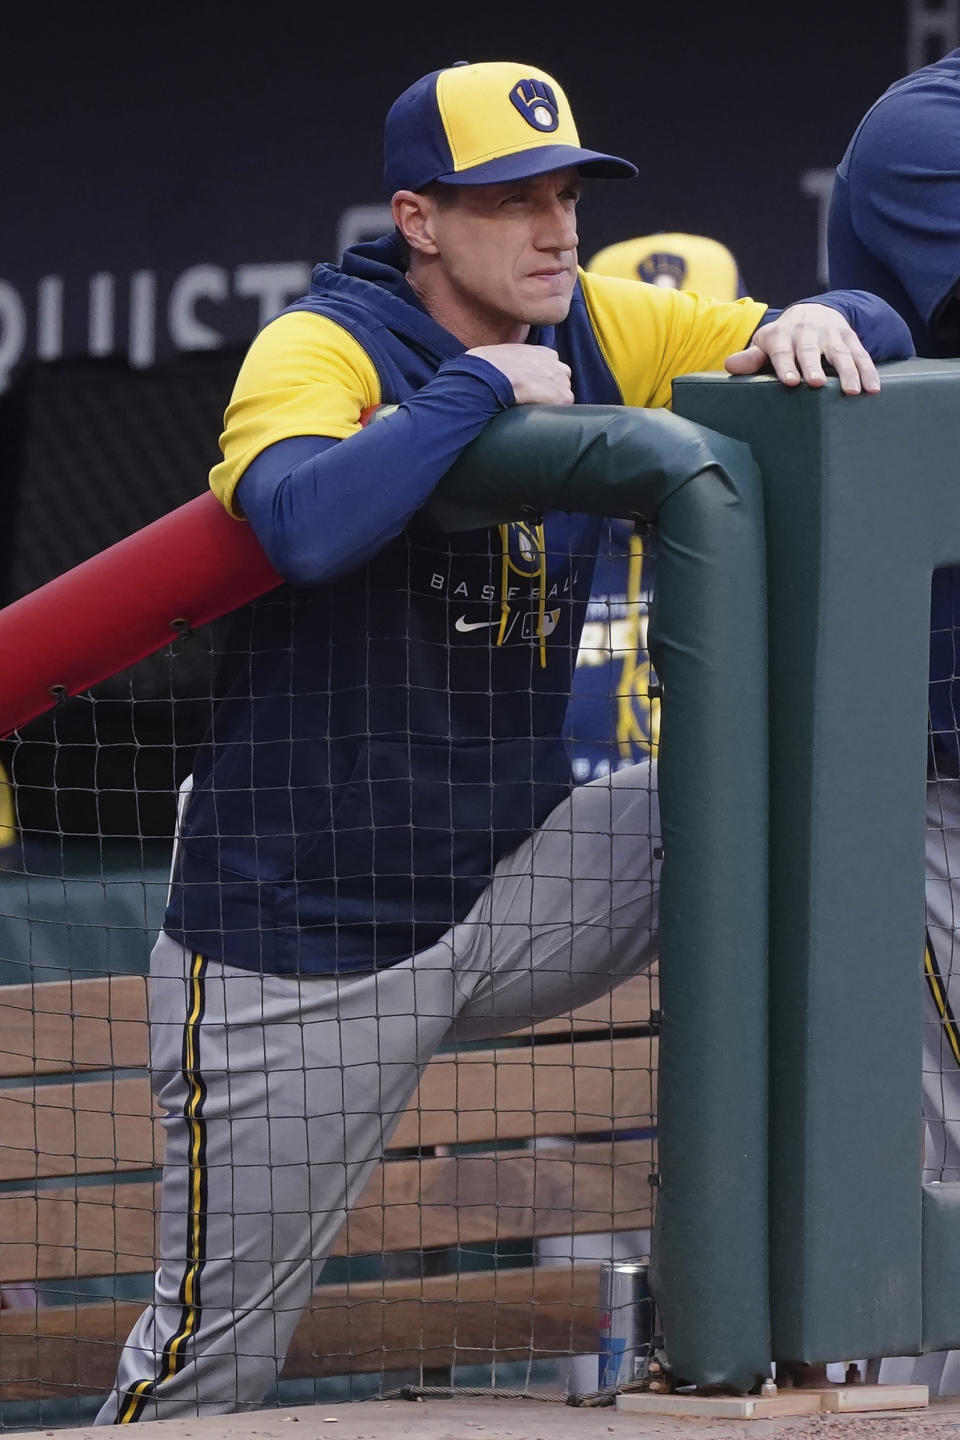 Milwaukee Brewers manager Craig Counsell watches from the dugout during the team's baseball game against the Atlanta Braves on Friday, May 6, 2022, in Atlanta. (AP Photo/John Bazemore)